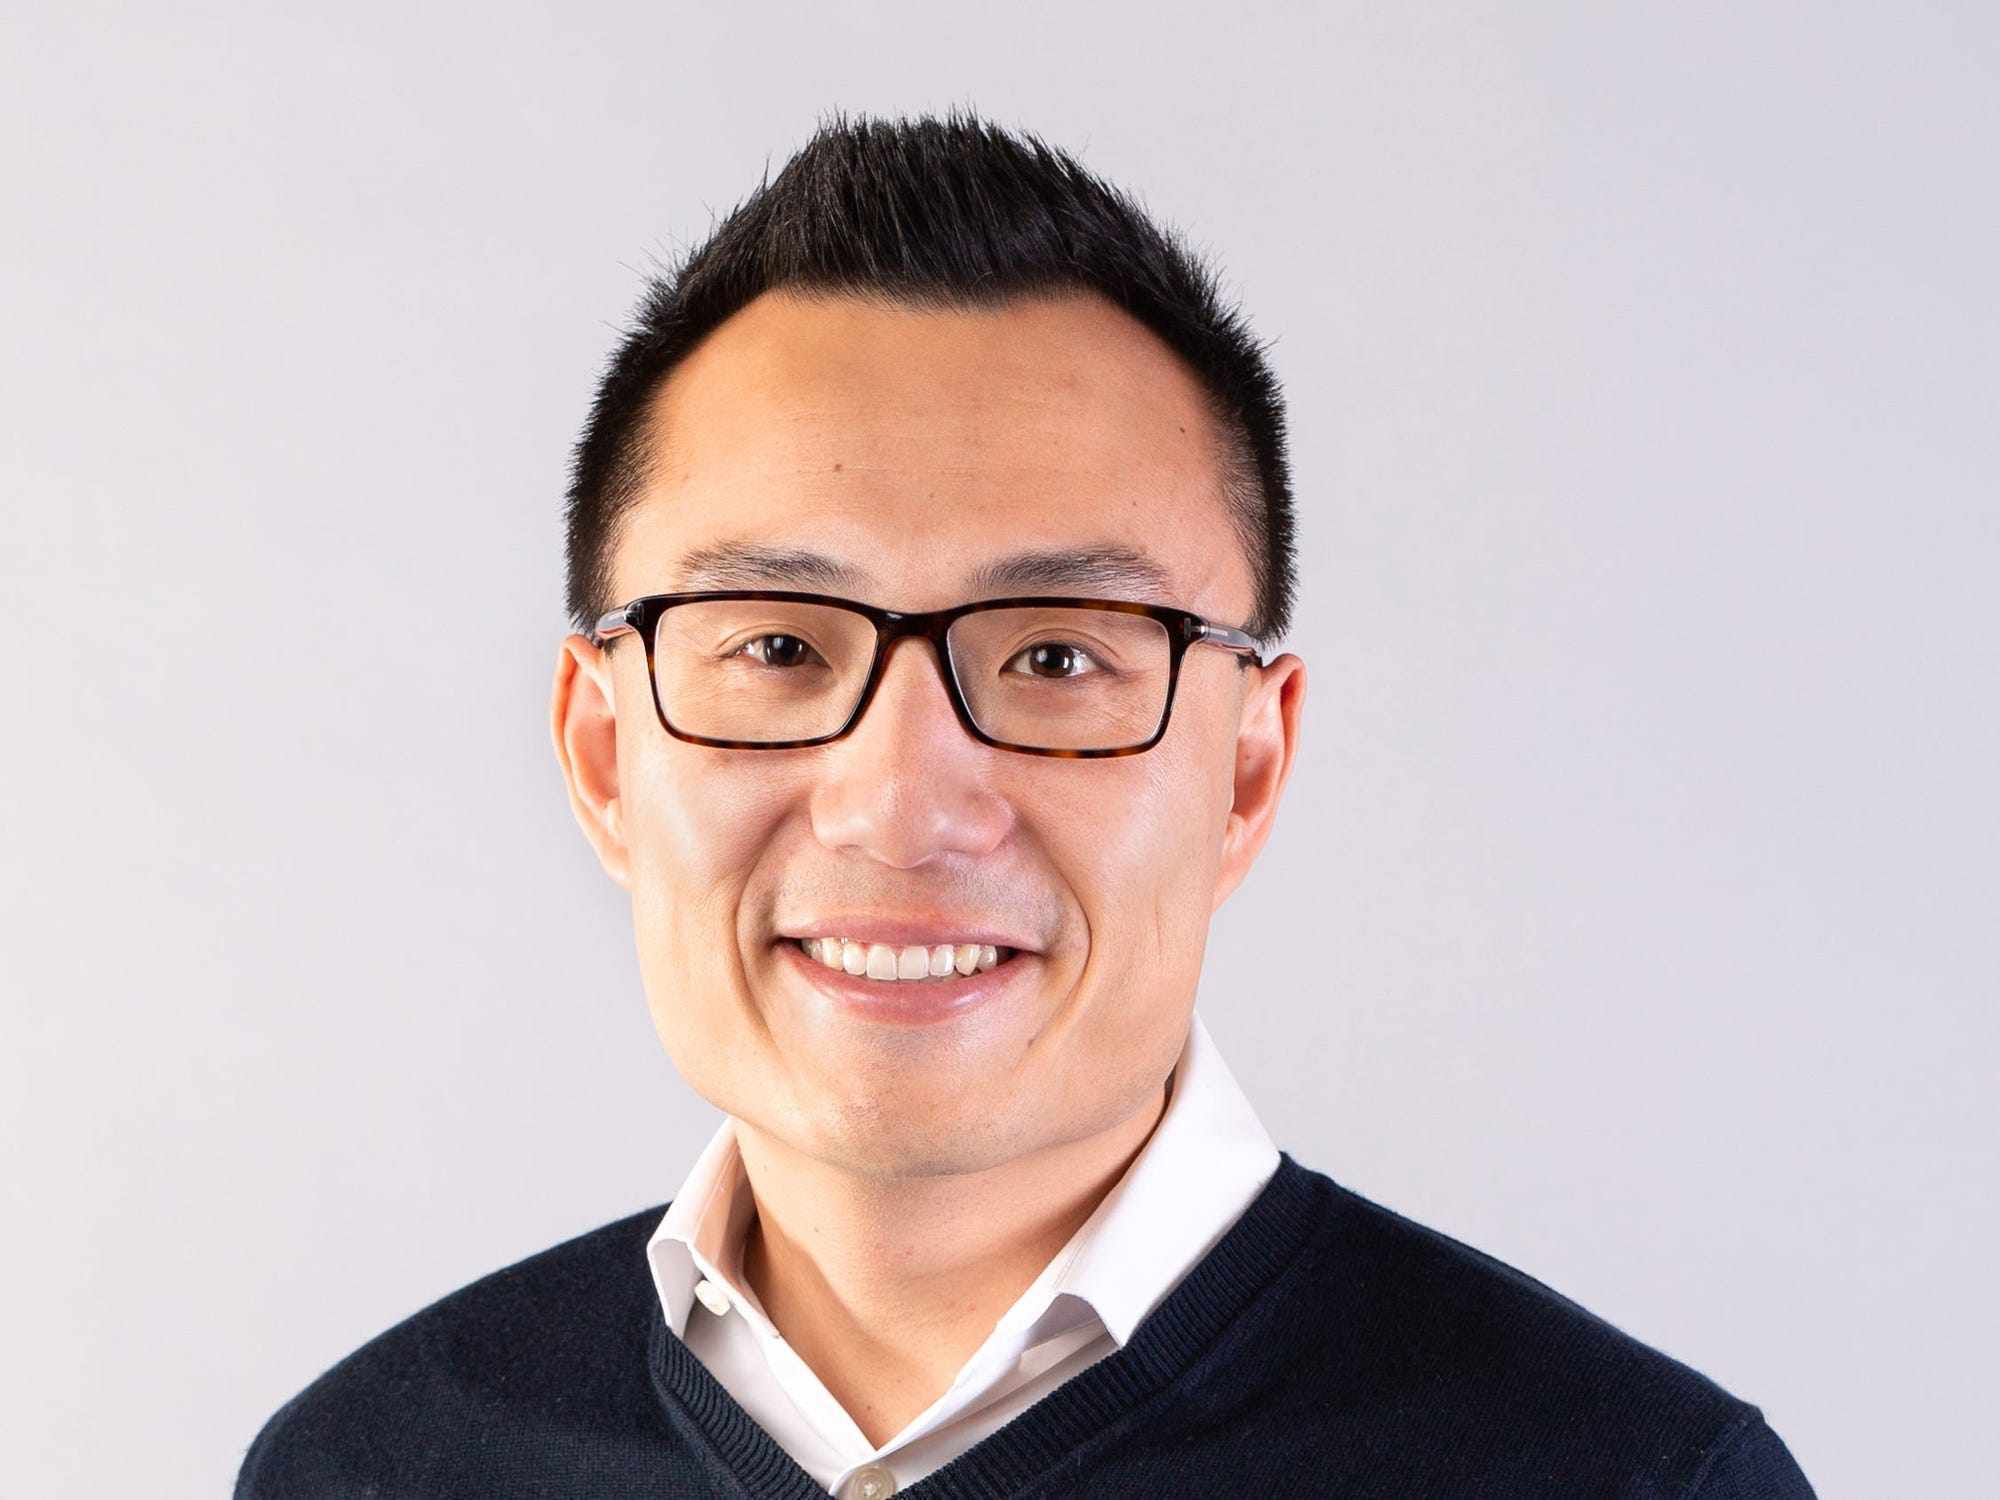 Tony Xu, DoorDash’s CEO, came from humble beginnings – and it’s helped shape the company’s philosophy. Photo: DoorDash